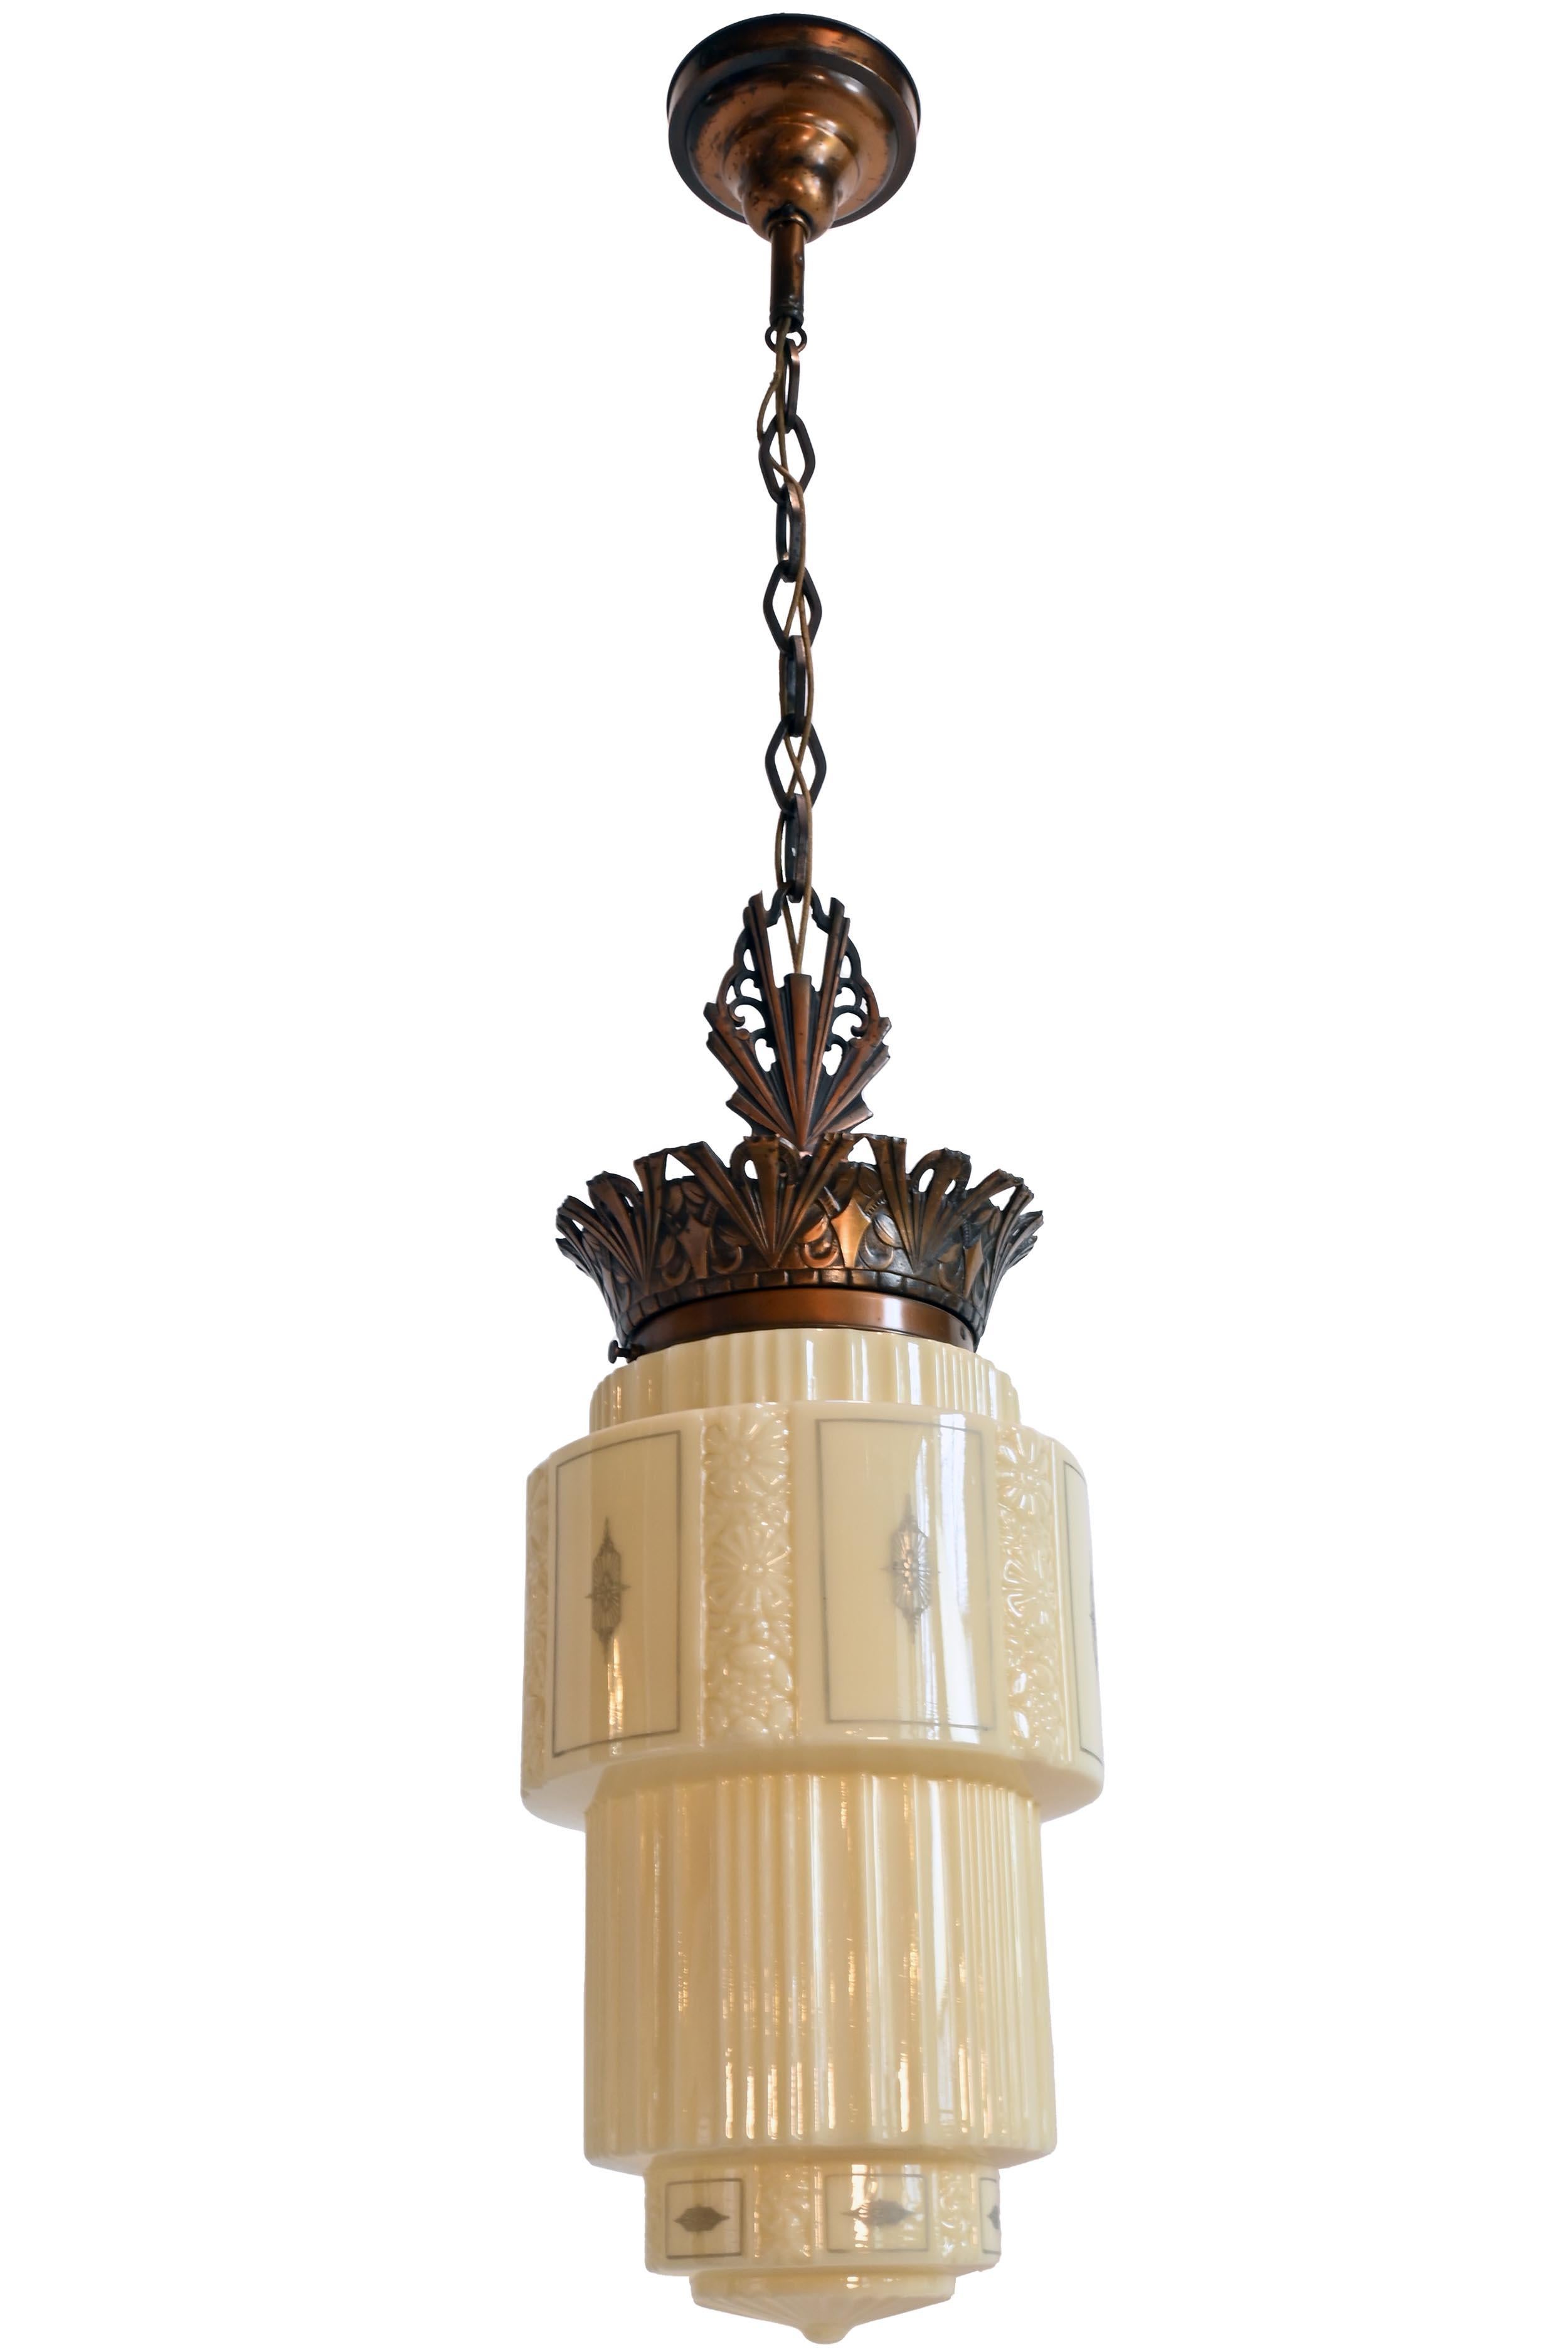 This finely crafted pendant features an Art Deco design and intricate stenciled details on a rarely seen custard glass shade. A pleasing mix of sharp lines and soft curved crown adorn the Bronze Plated frame. This pendant has a skyscraper design